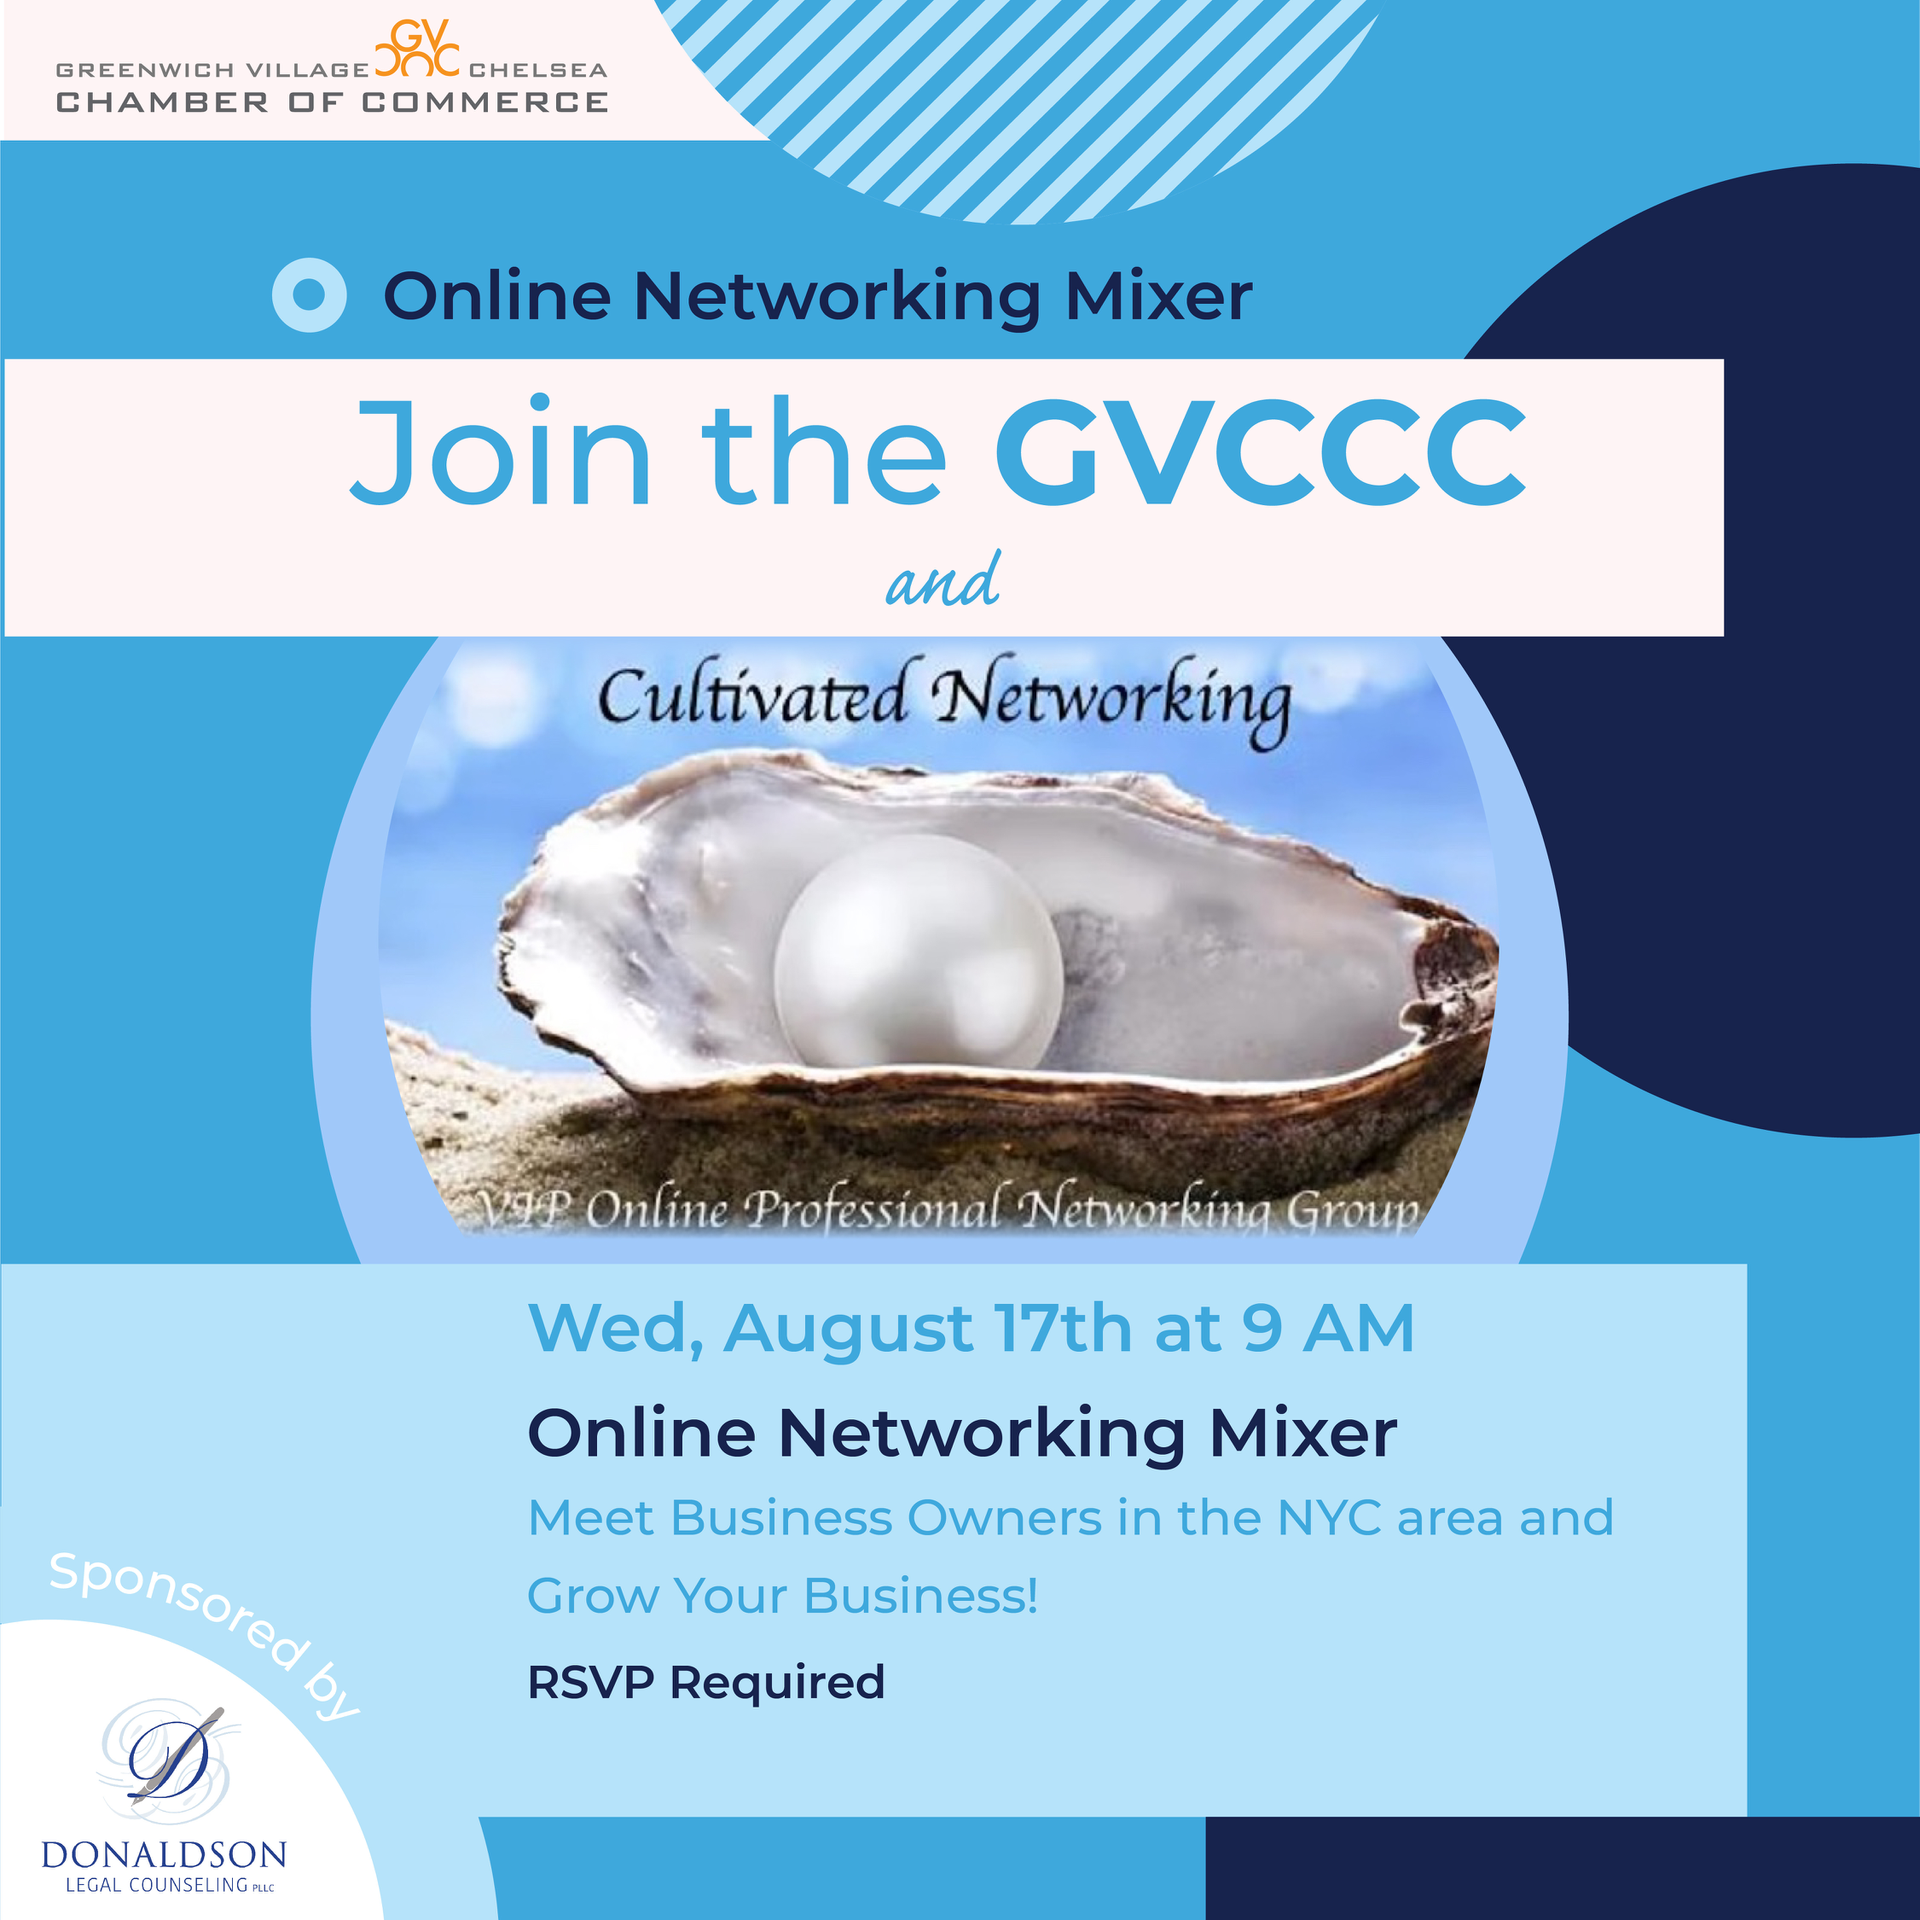 thumbnails GVCCC + Cultivated Networking  Online Mixer